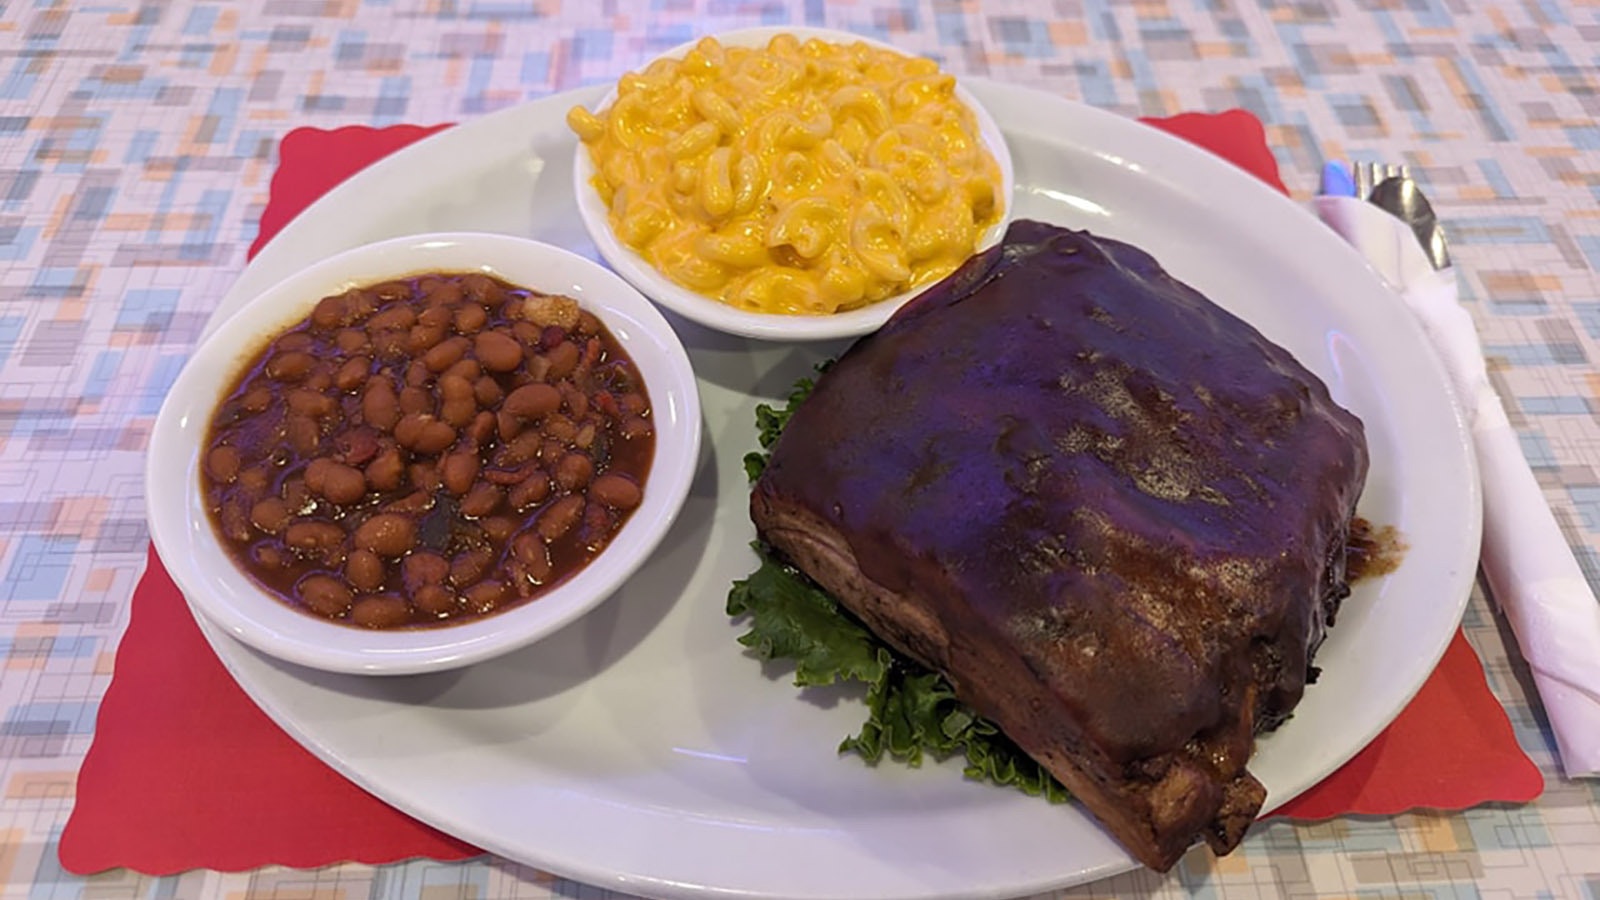 The Coca-Cola braised spareribs at Johnny J's Diner.